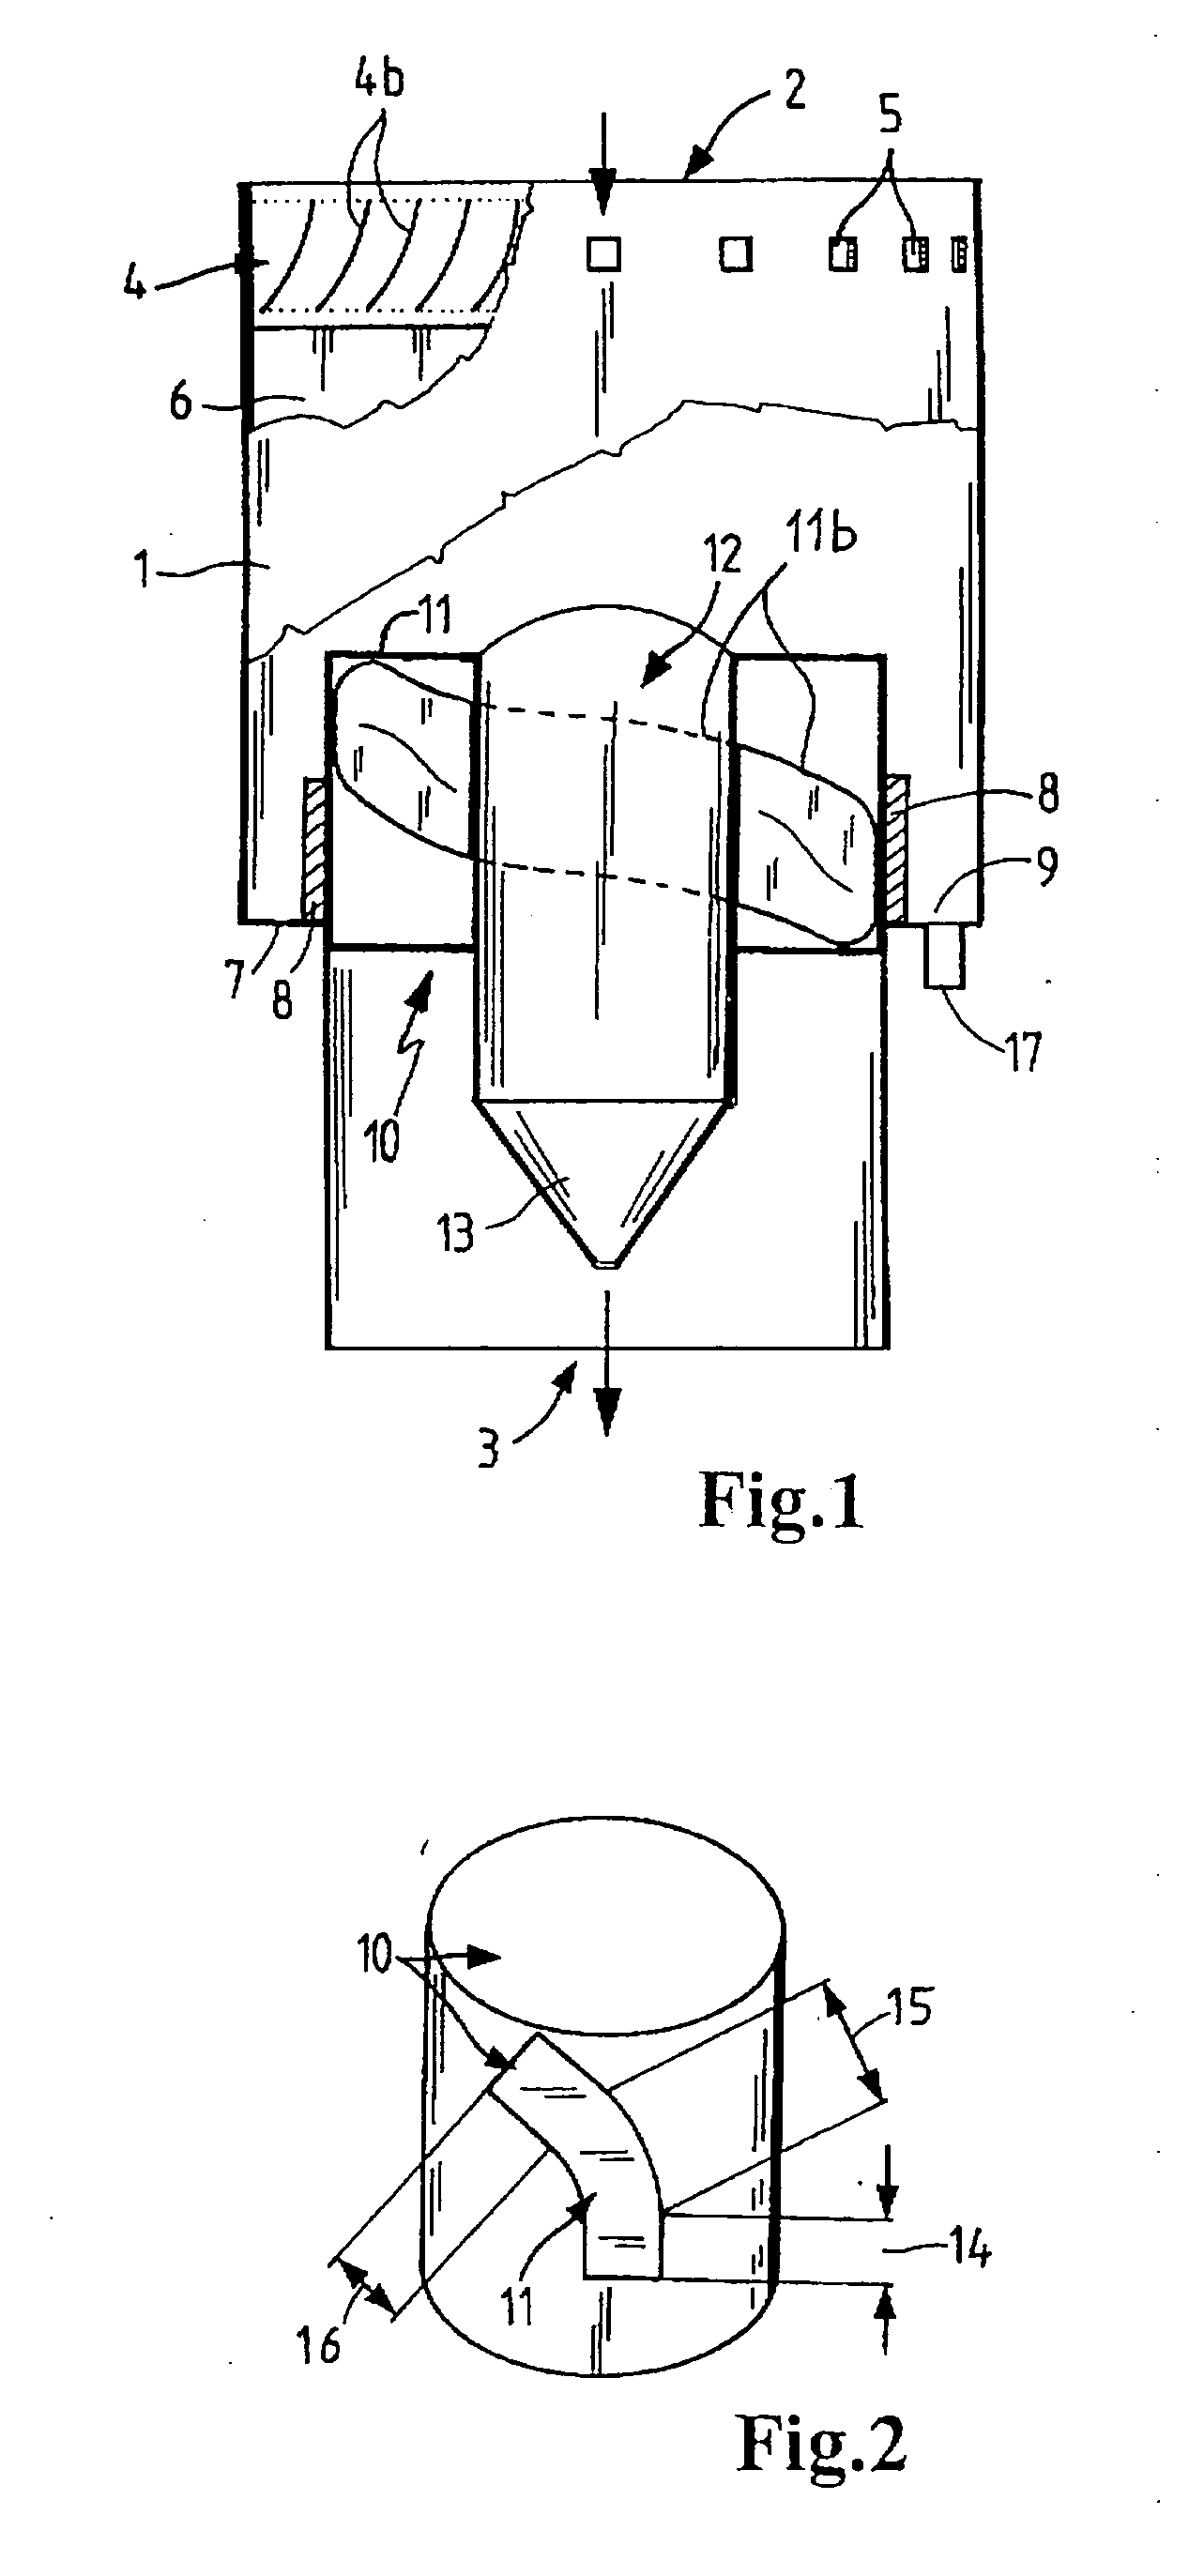 Apparatus for separating particles from a flowing medium